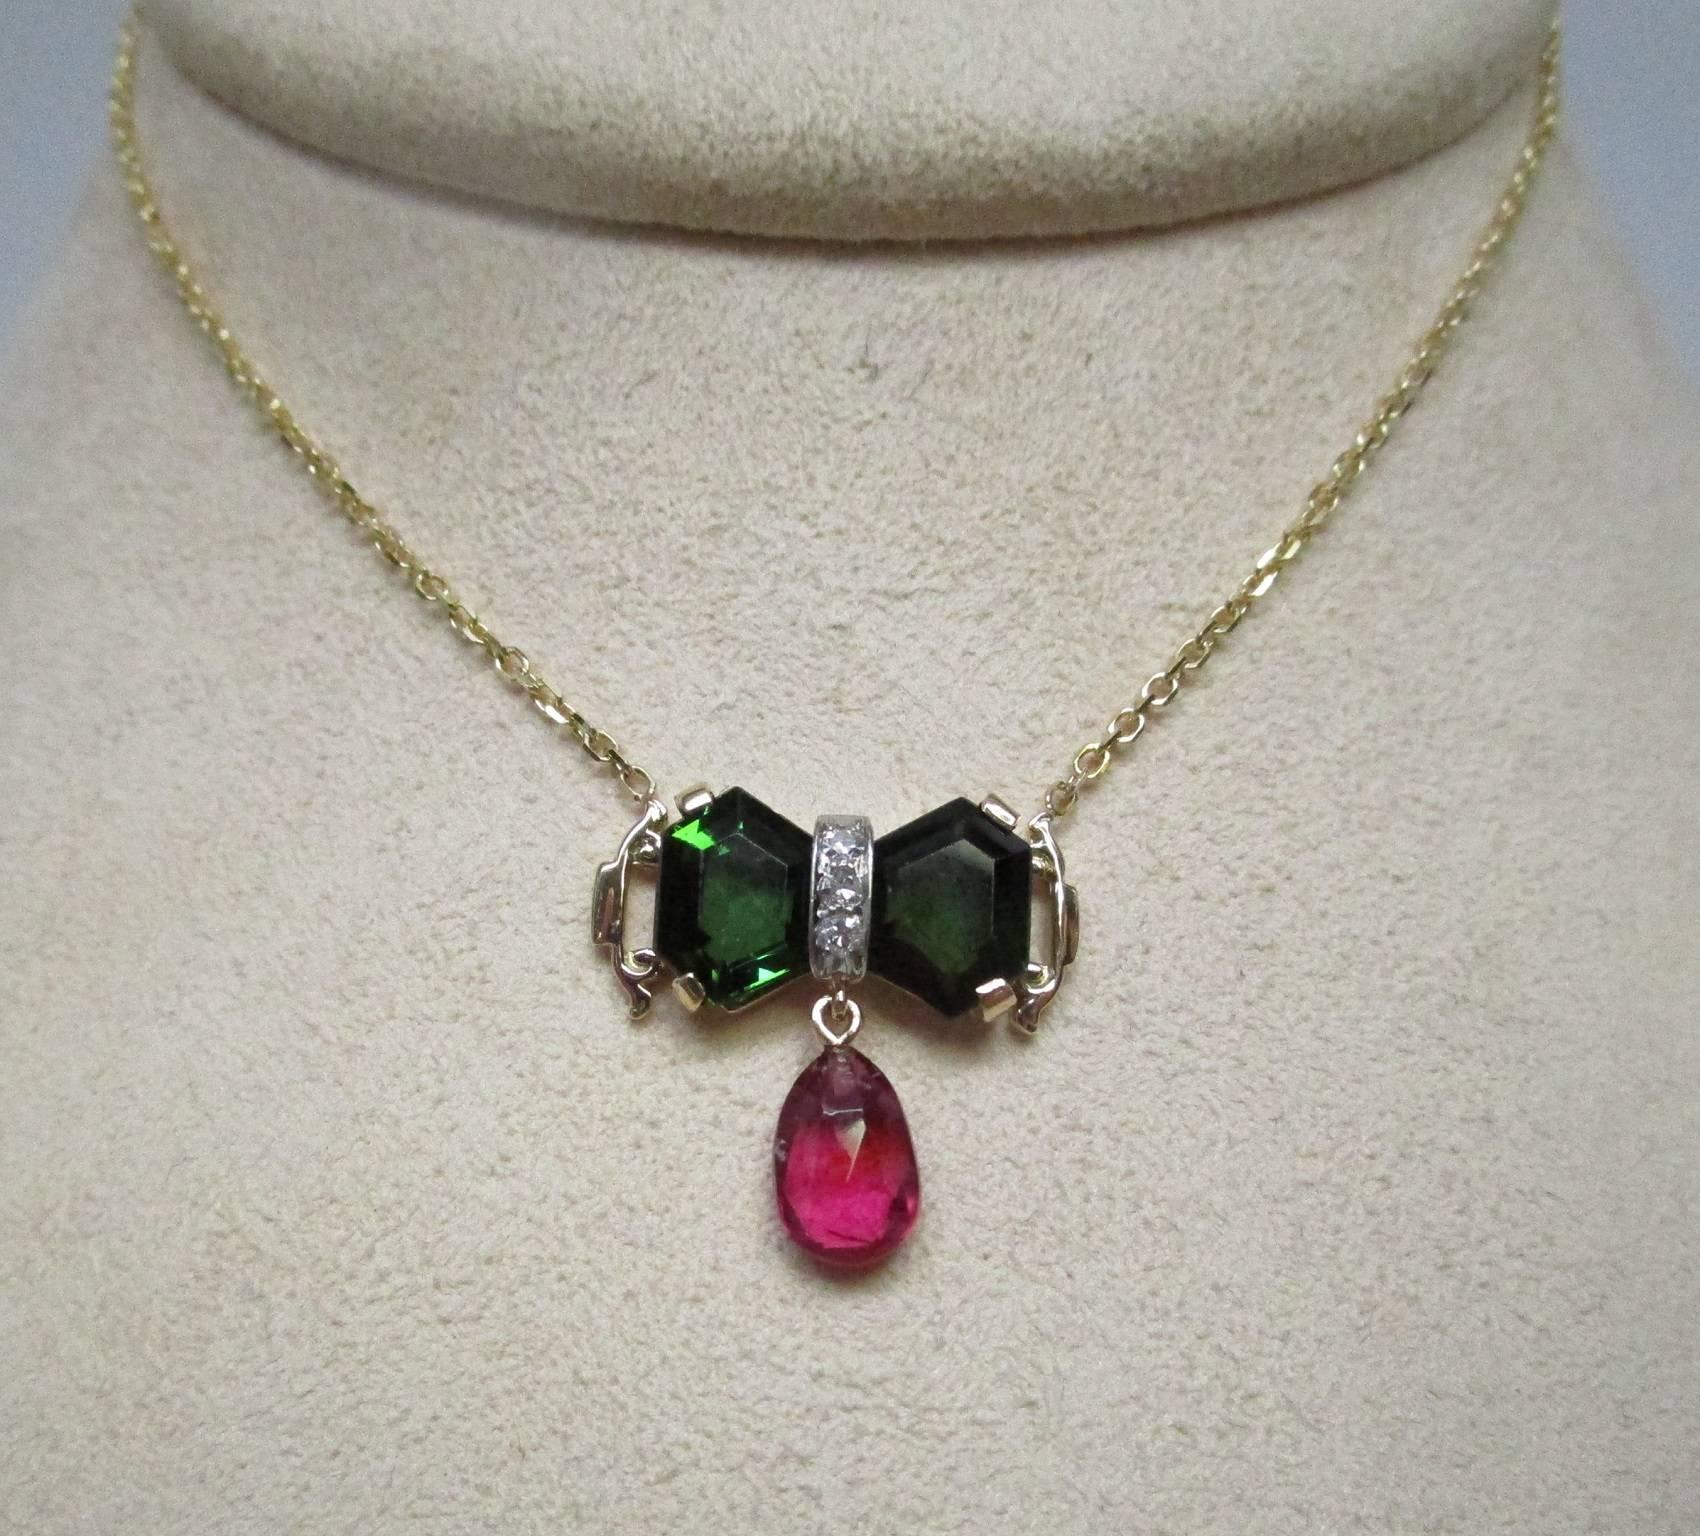 This is a one-of-a-kind 14 karat gold necklace. It has two impressive dark green tourmalines and an eye popping rubelite briolette, not to mention three single cut diamonds. The combination is stunning. This could easiliy become your everyday